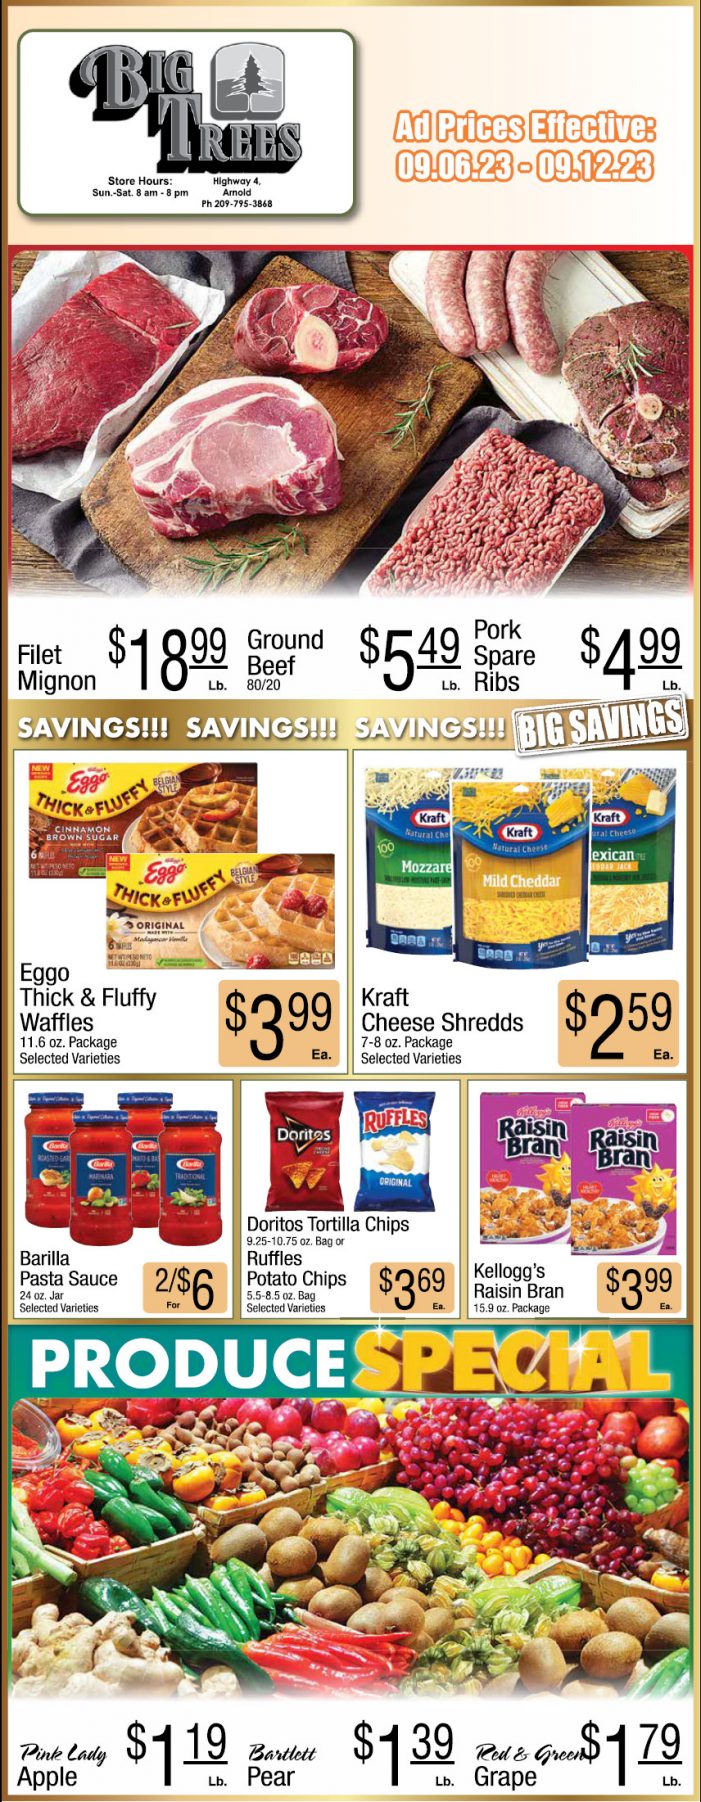 Big Trees Market Weekly Ad, Grocery, Produce, Meat & Deli Specials Through September 12th!  Shop Local & Save!